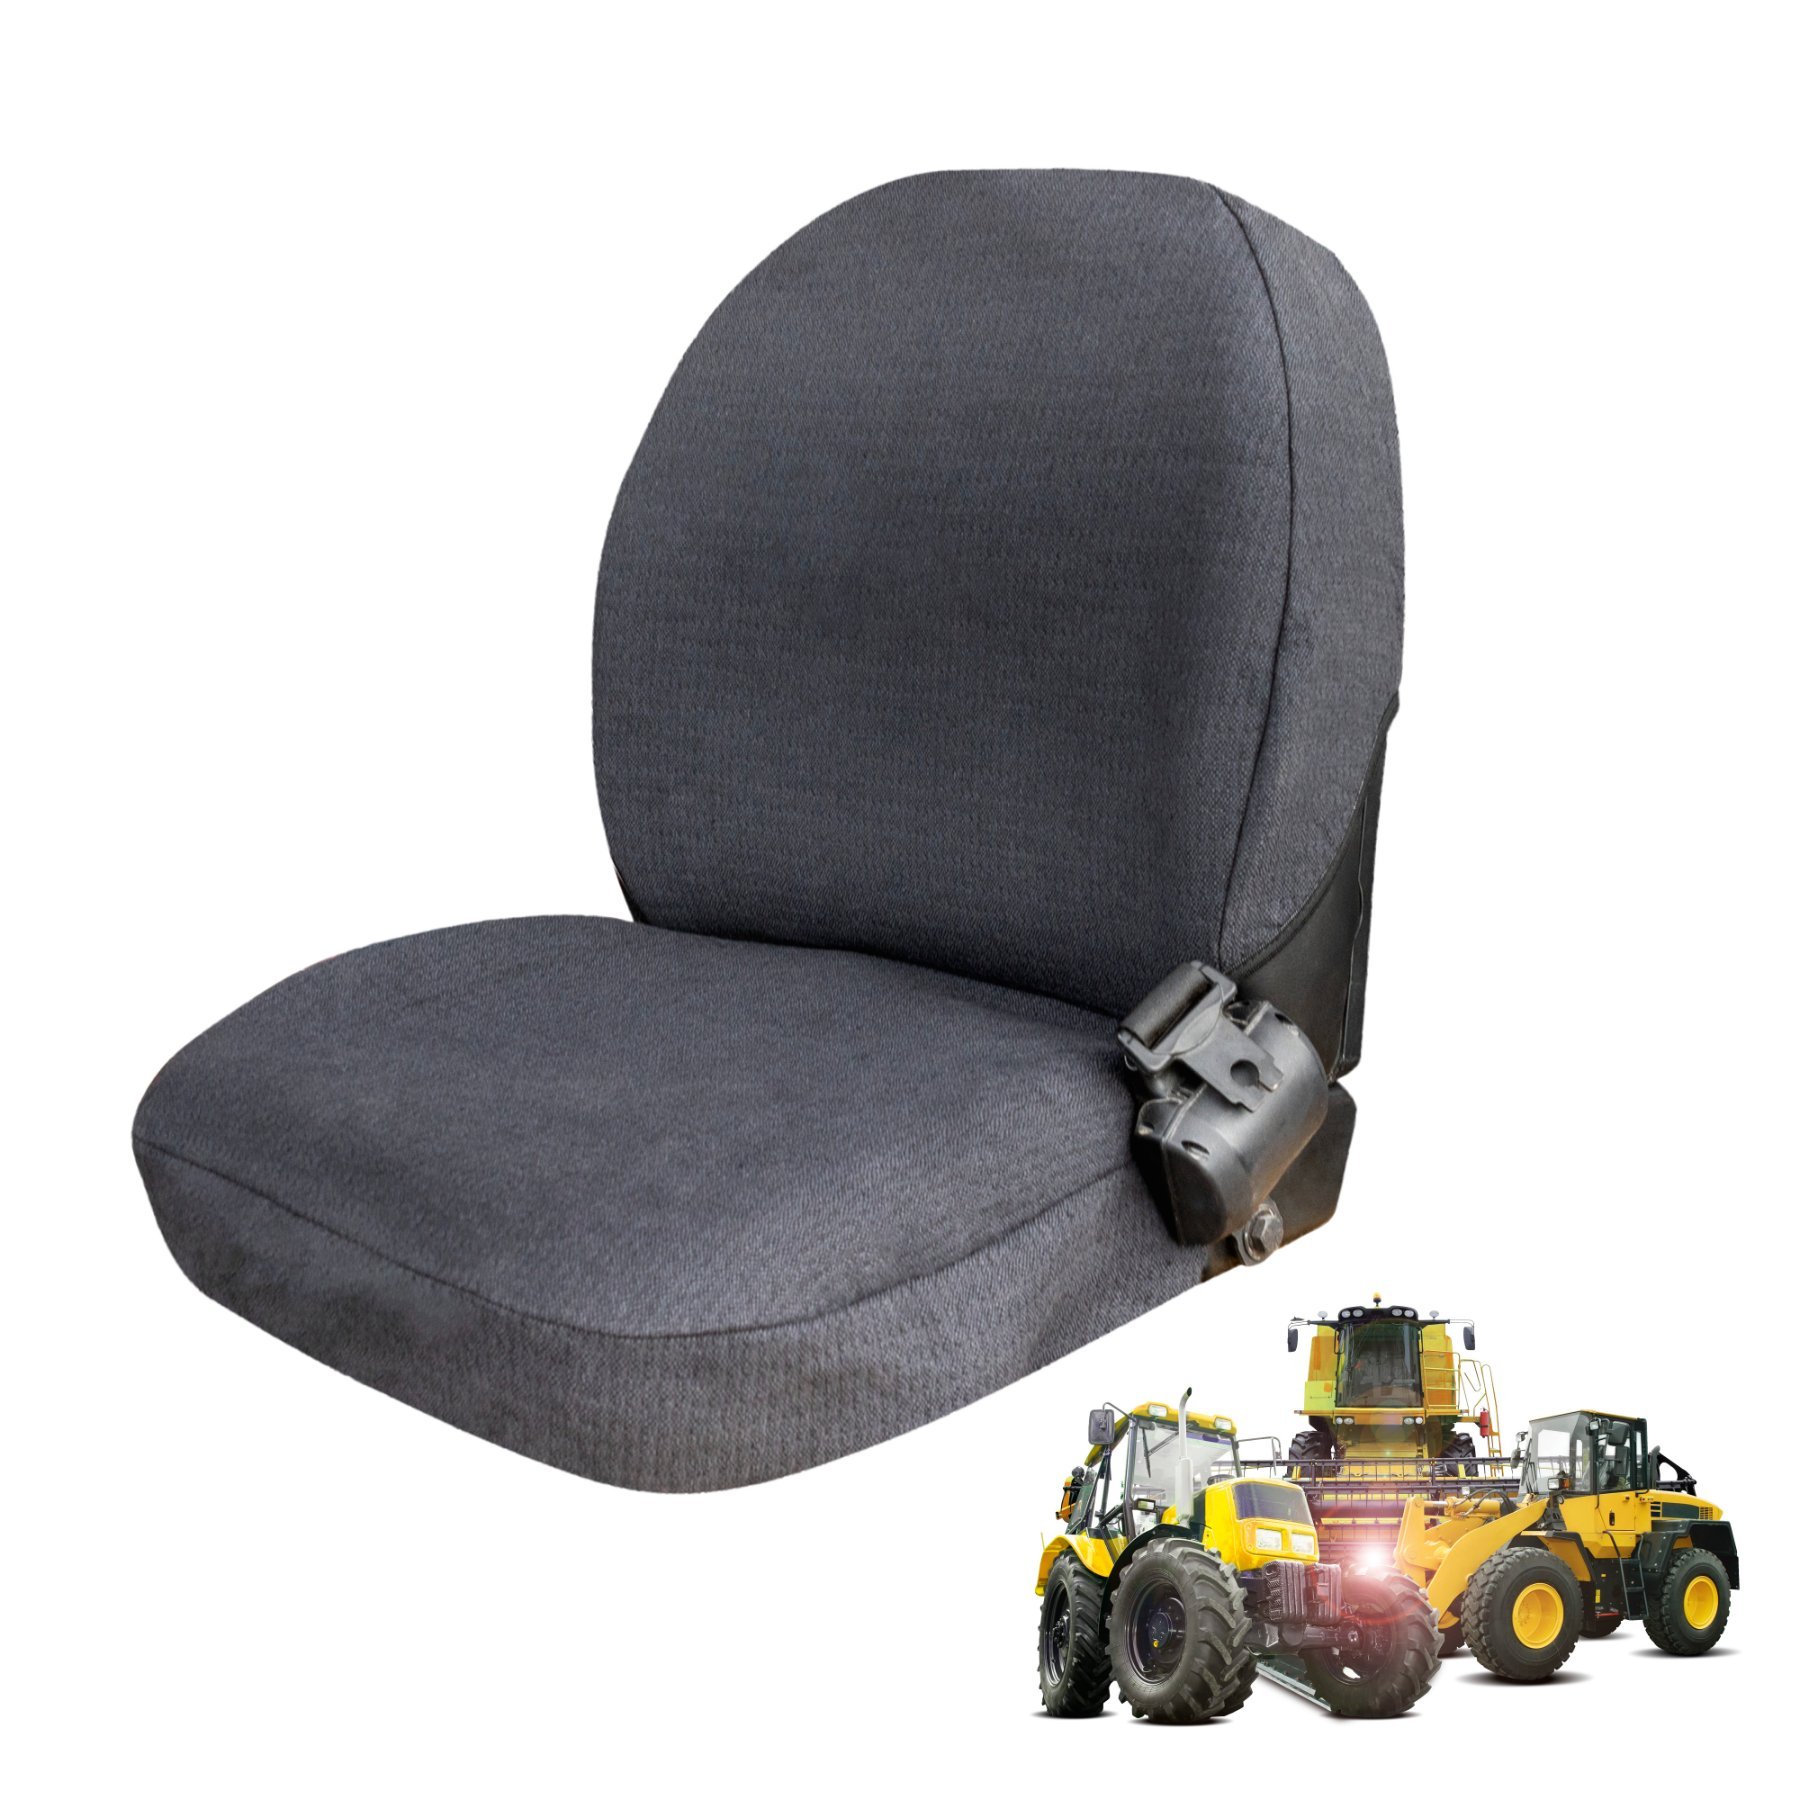 Semi-fit Seat cover for tractors and construction machinery - size 3